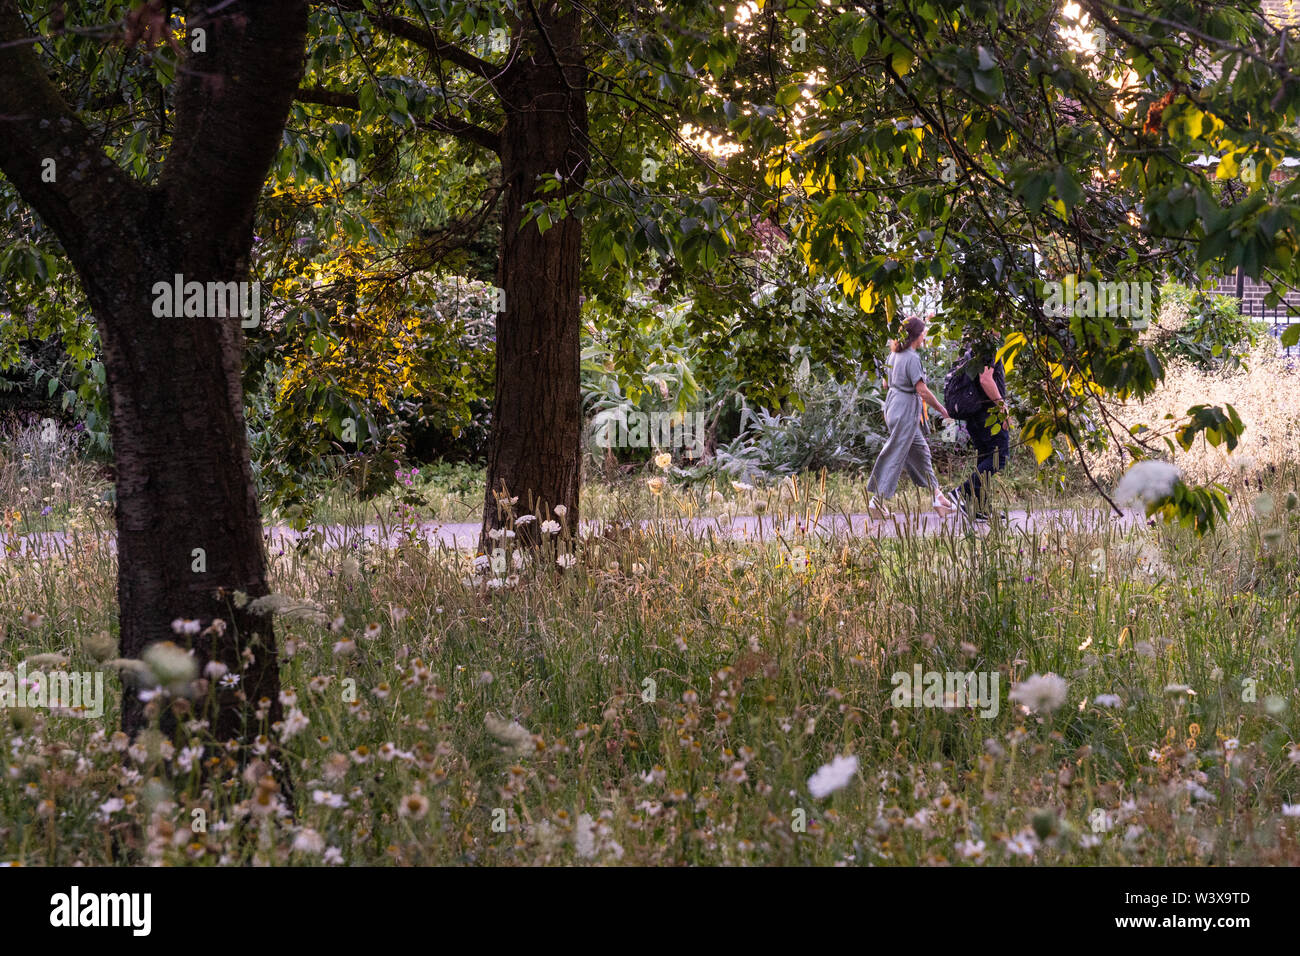 Wild flowers in Lammas Park in Ealing, London, on a sunny summers day. Photo date: Monday, July 15, 2019. Photo: Roger Garfield/Alamy Stock Photo